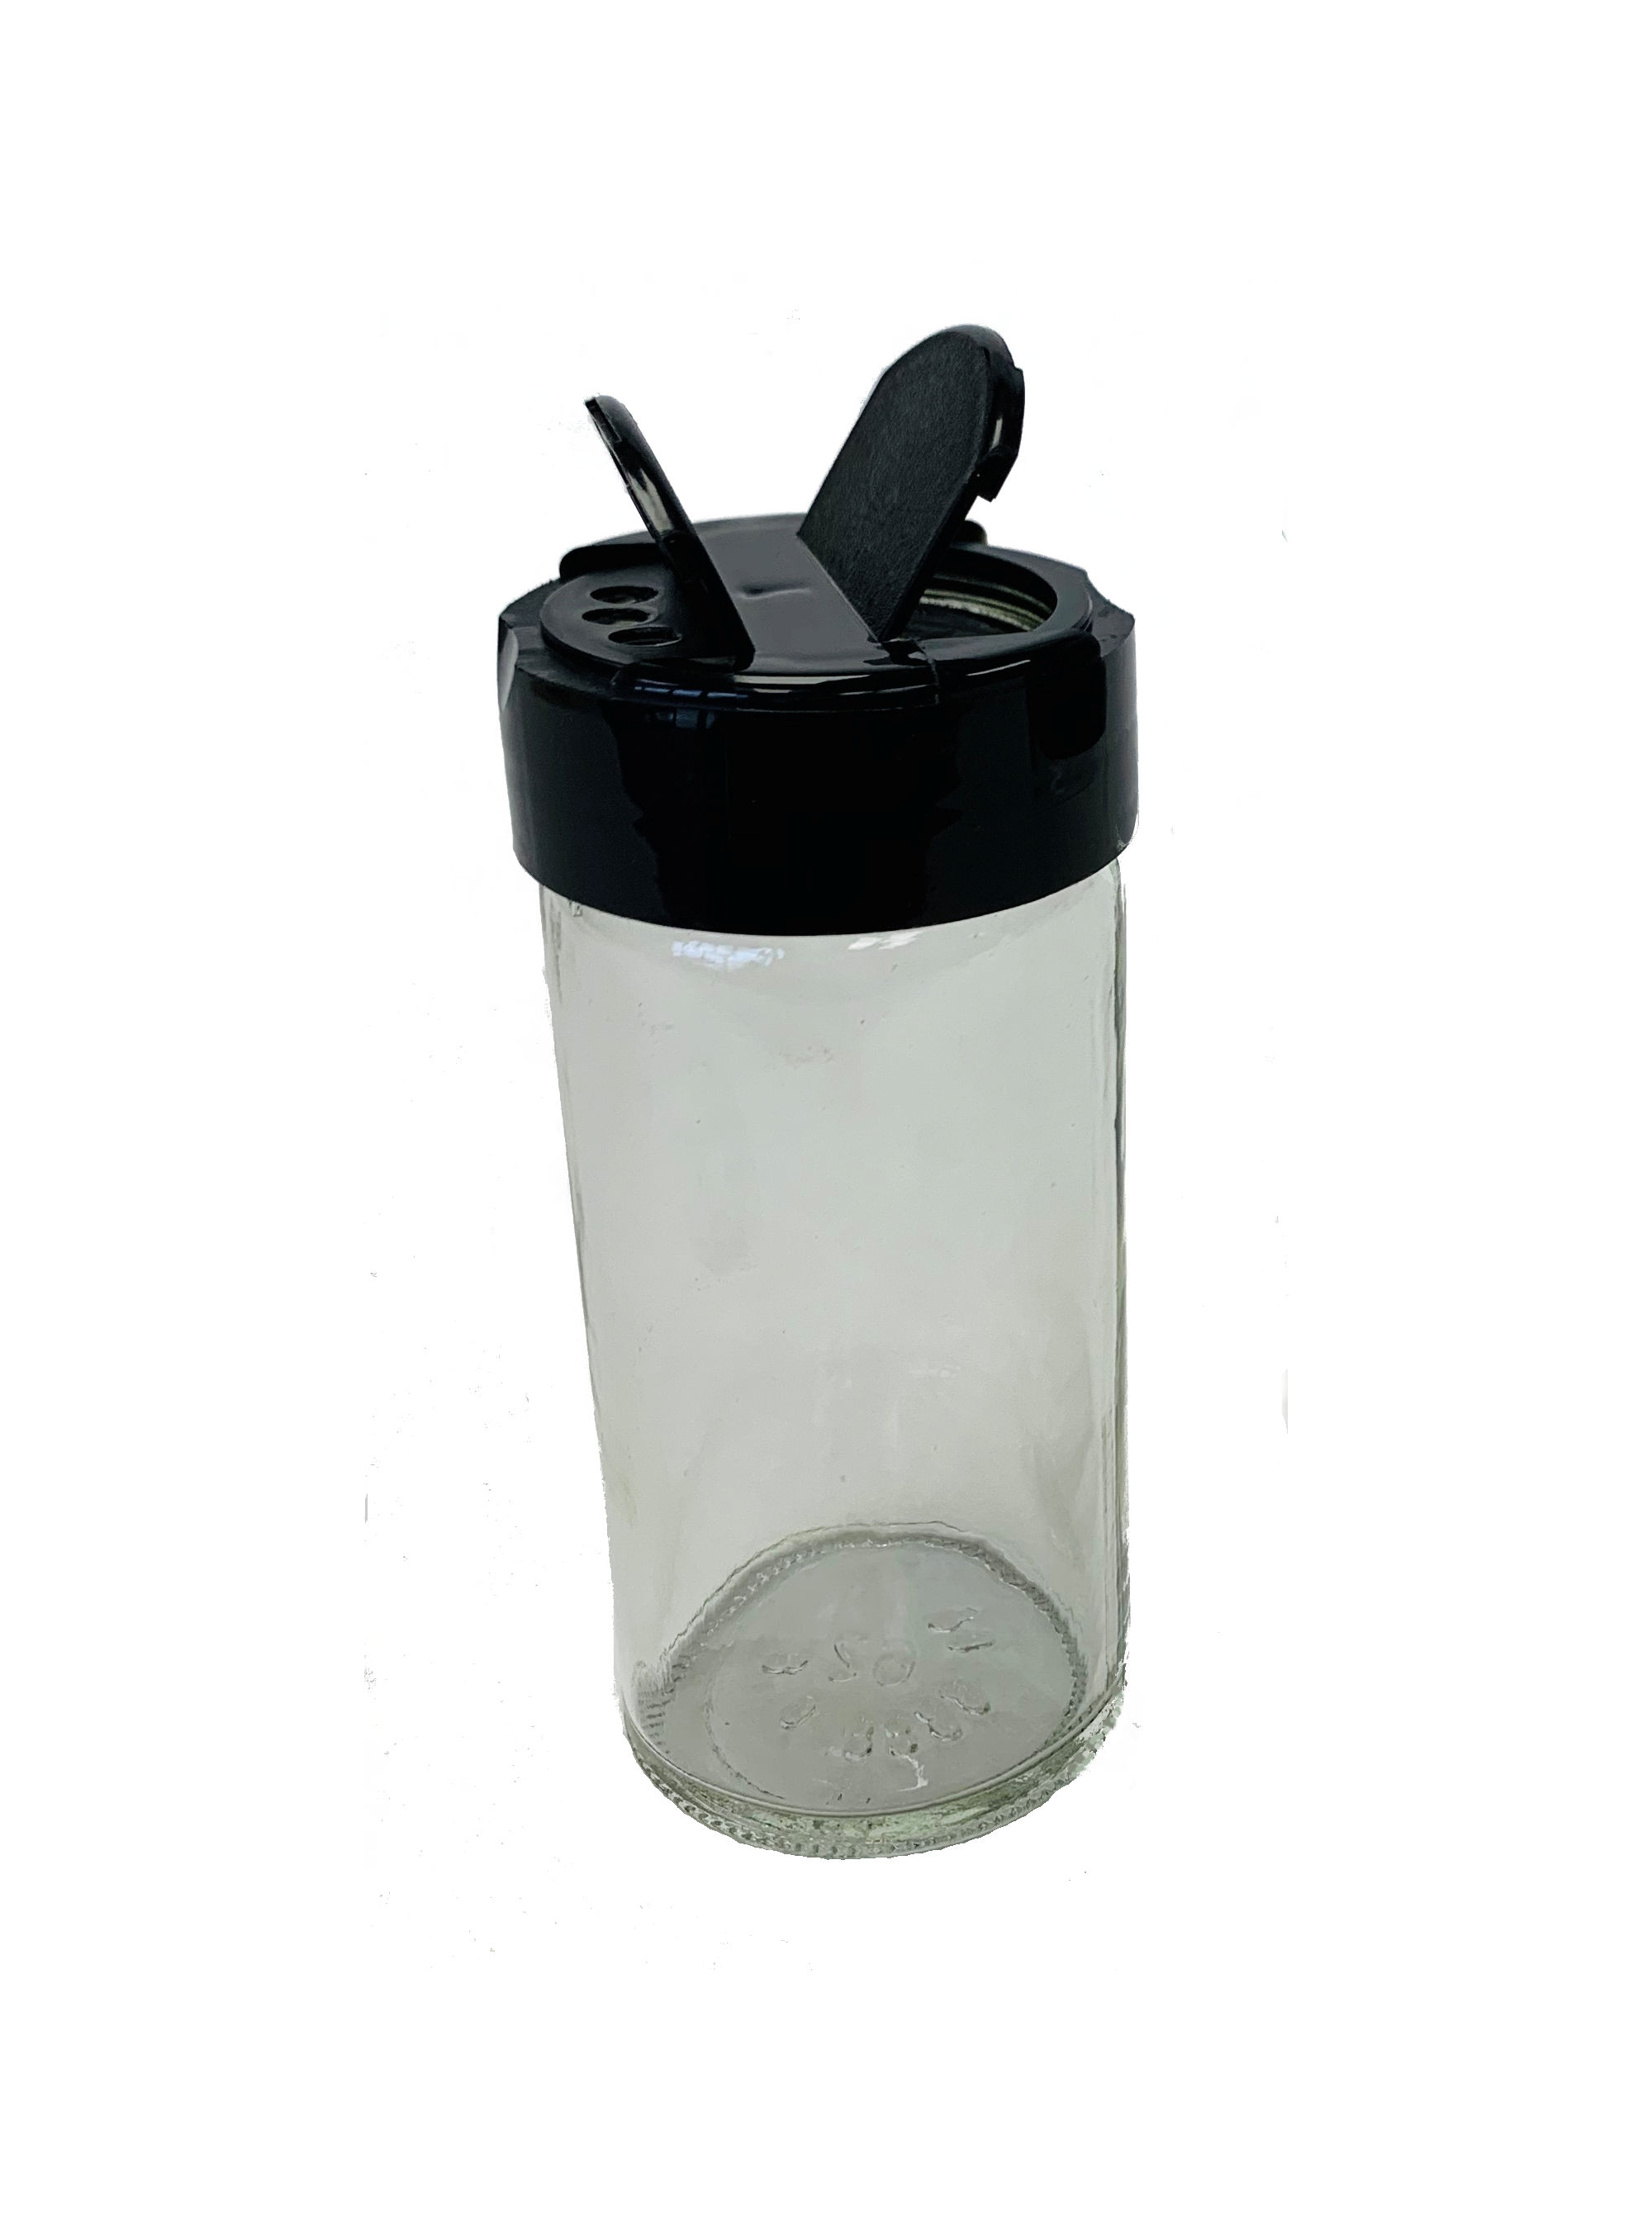 4 oz Clear Glass Spice Bottle with Shaker Lid and Pour/Spoon Dispenser